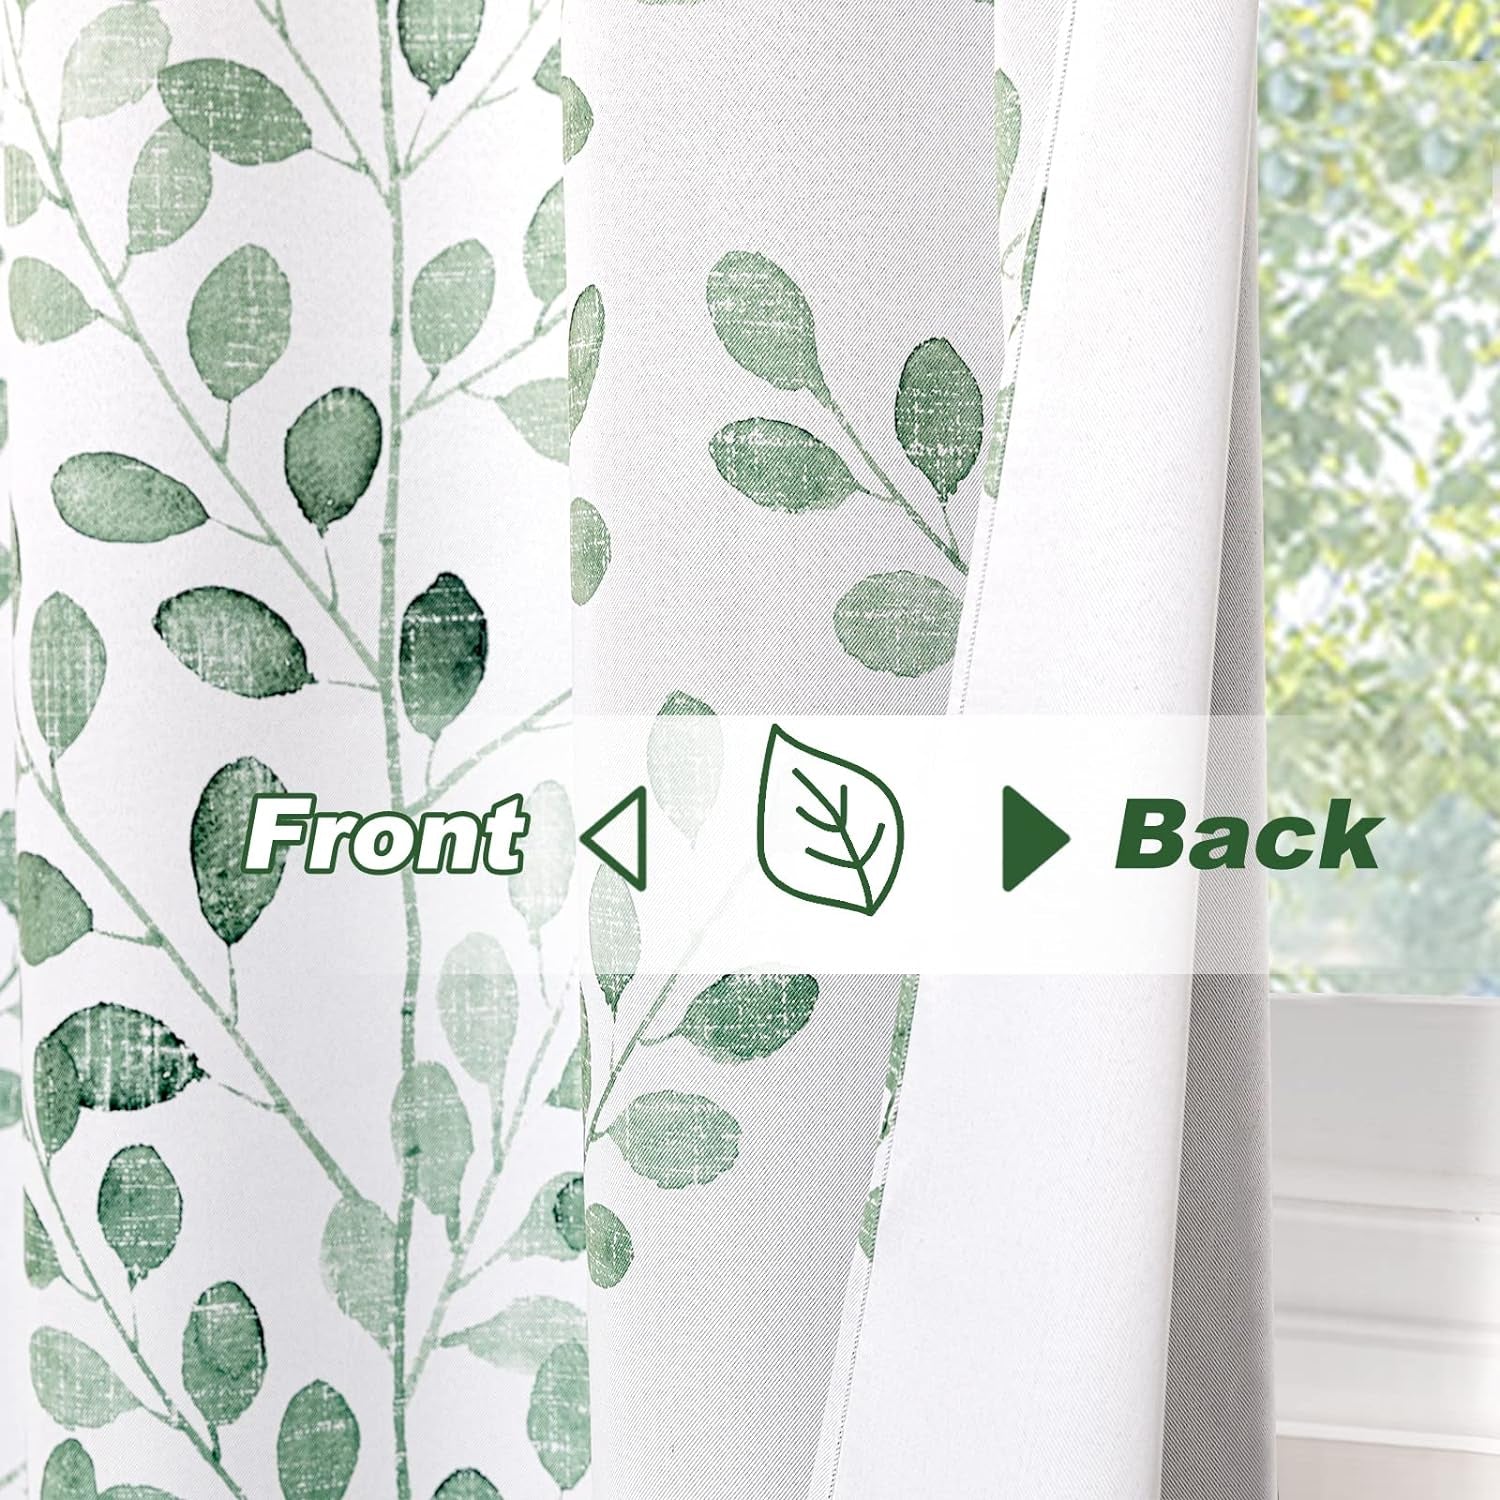 MYSKY HOME Curtains for Bedroom 63 Inches Long Thermal Insulated Room Darkening Curtains Tree Branch Print Pattern Classic Curtains for Dining Room Home Decor Grommet Top Drapes, Sage, 2 Pieces  MYSKY HOME   